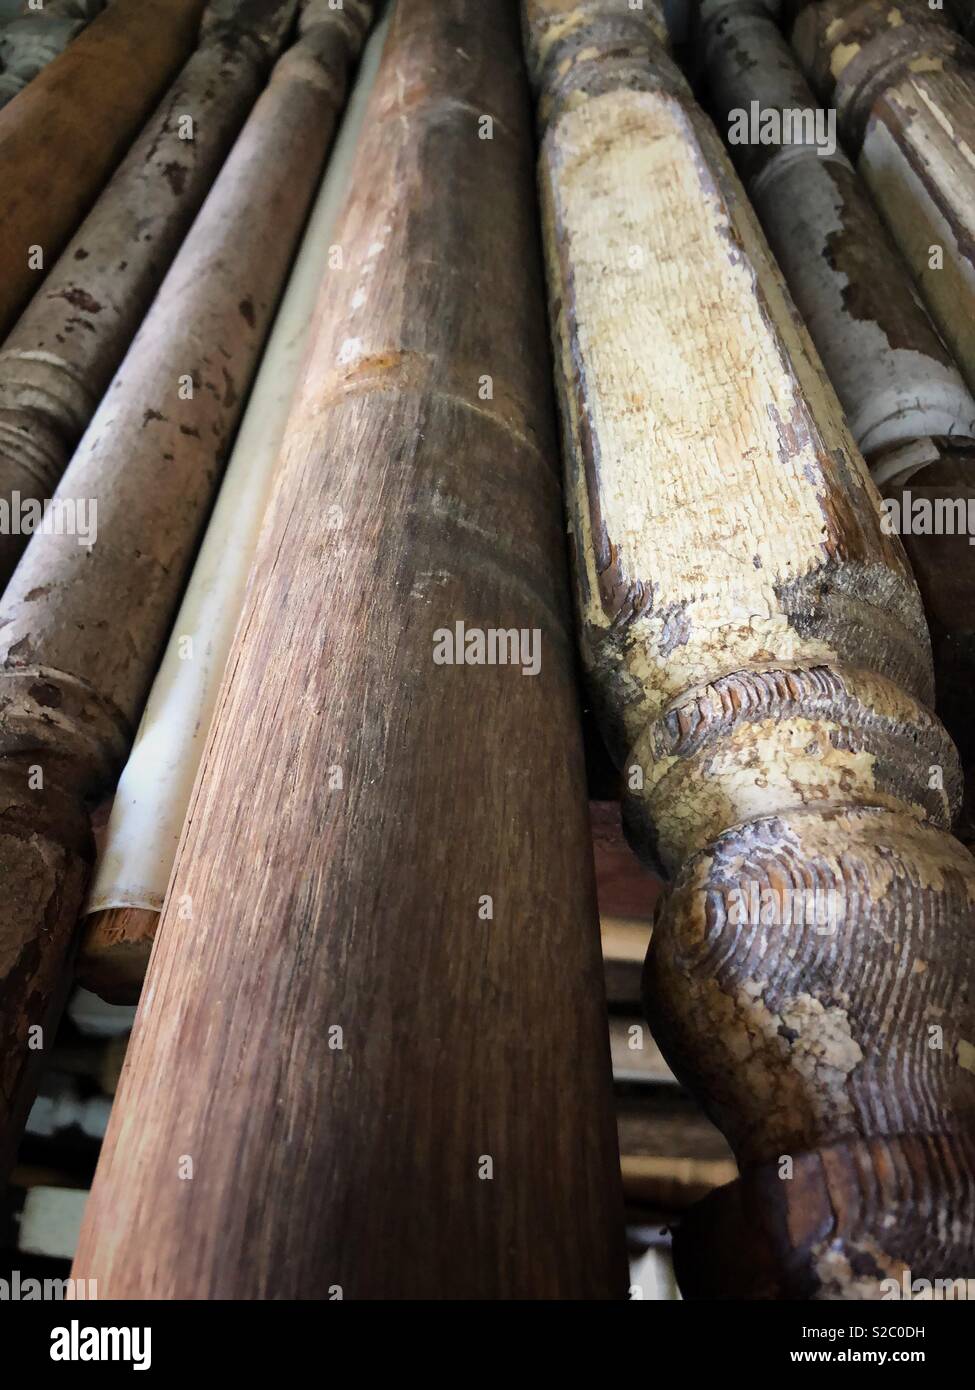 Antique wooden spindles found at Ohmega Salvage in Berkeley, California. Stock Photo